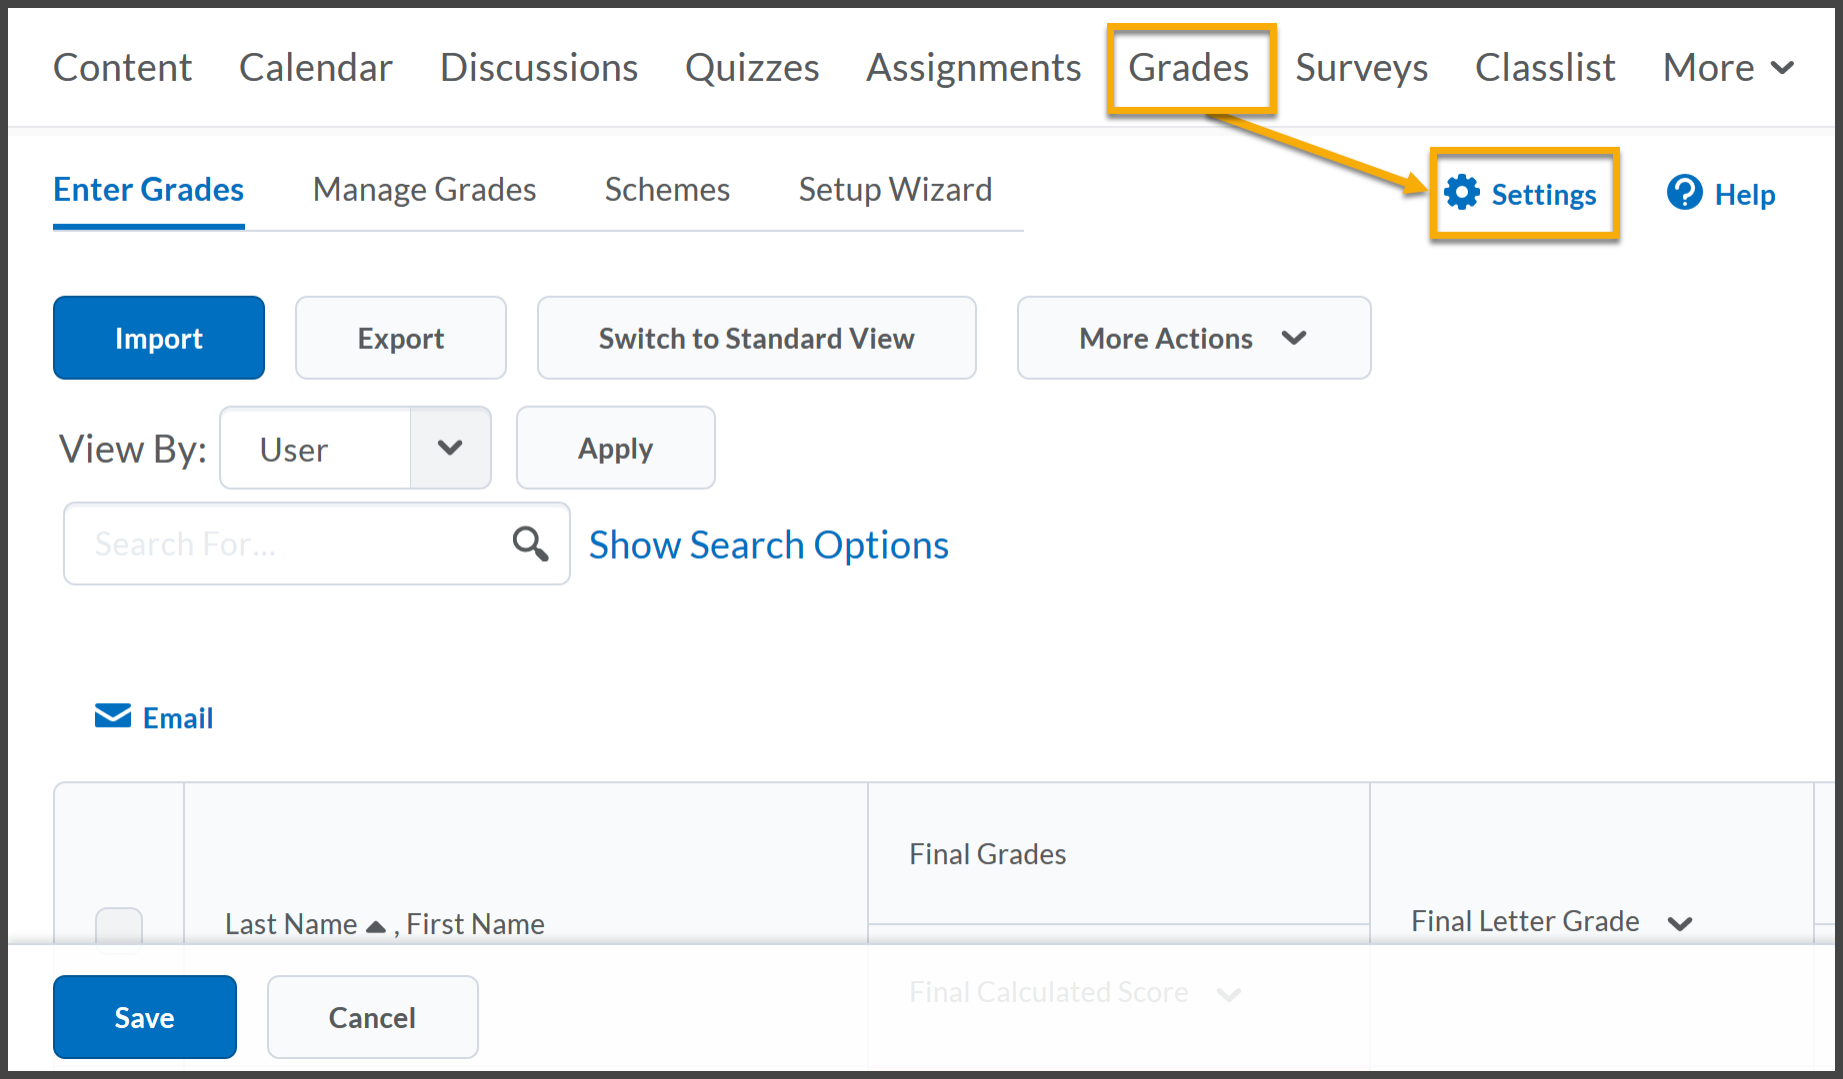 From Grades, arrow points to Settings.